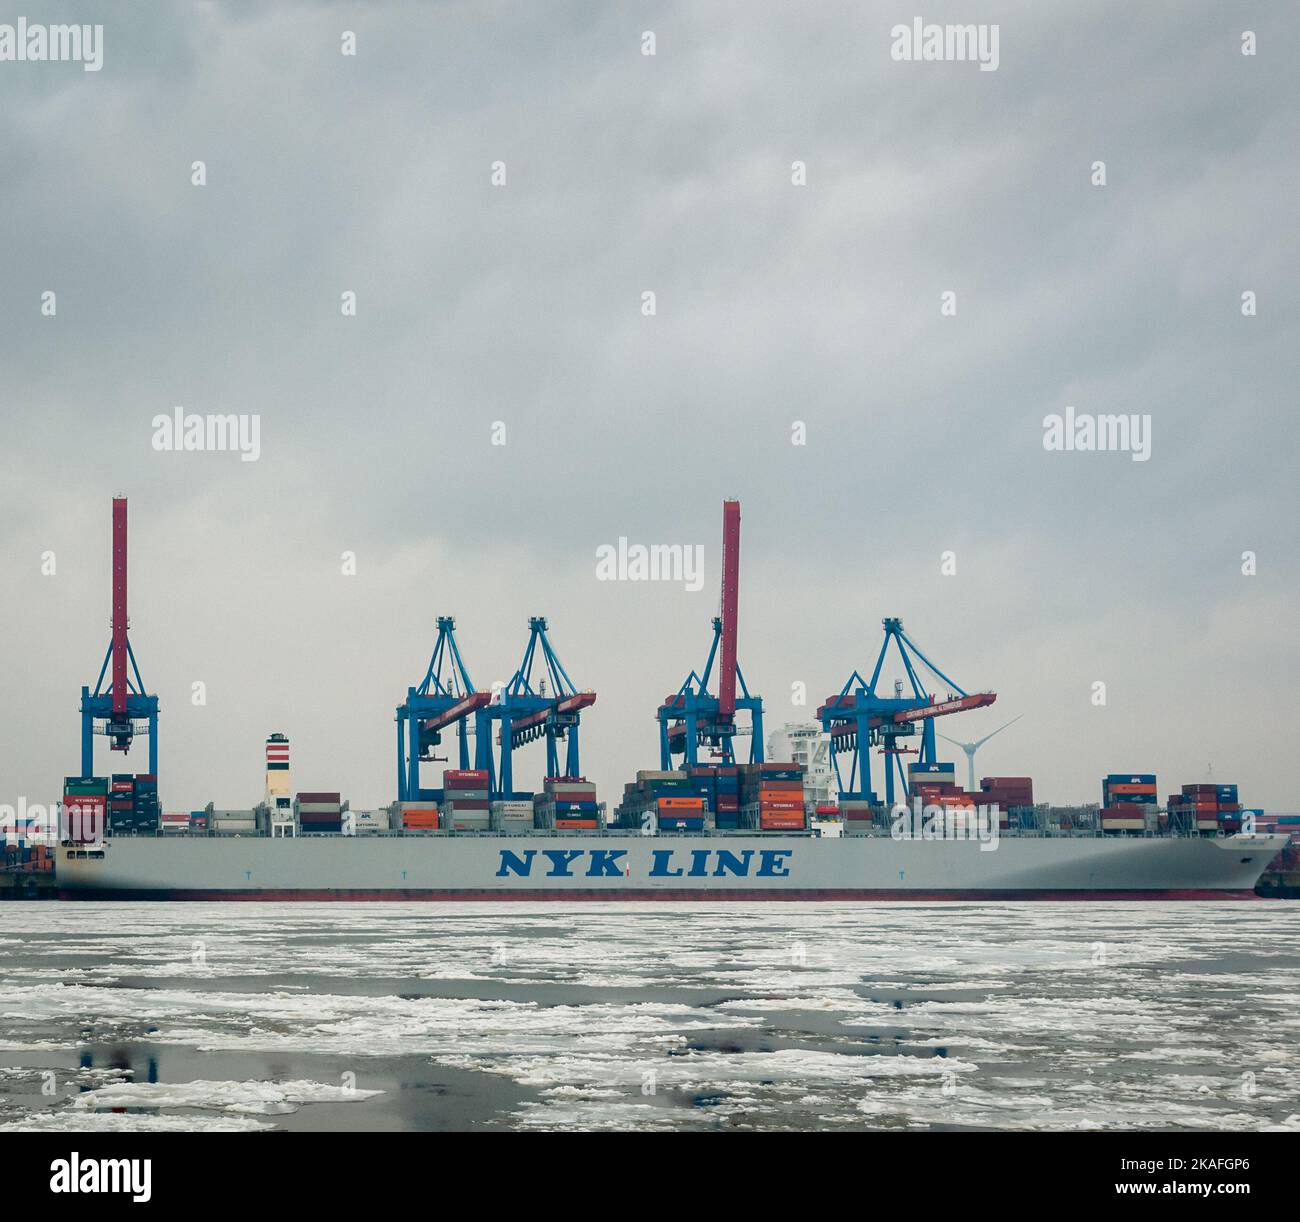 Hamburg, Germany - February 23, 2014: NYK Line Container ship in Hamburg Harbor at Container Terminal Altenwerder. Stock Photo